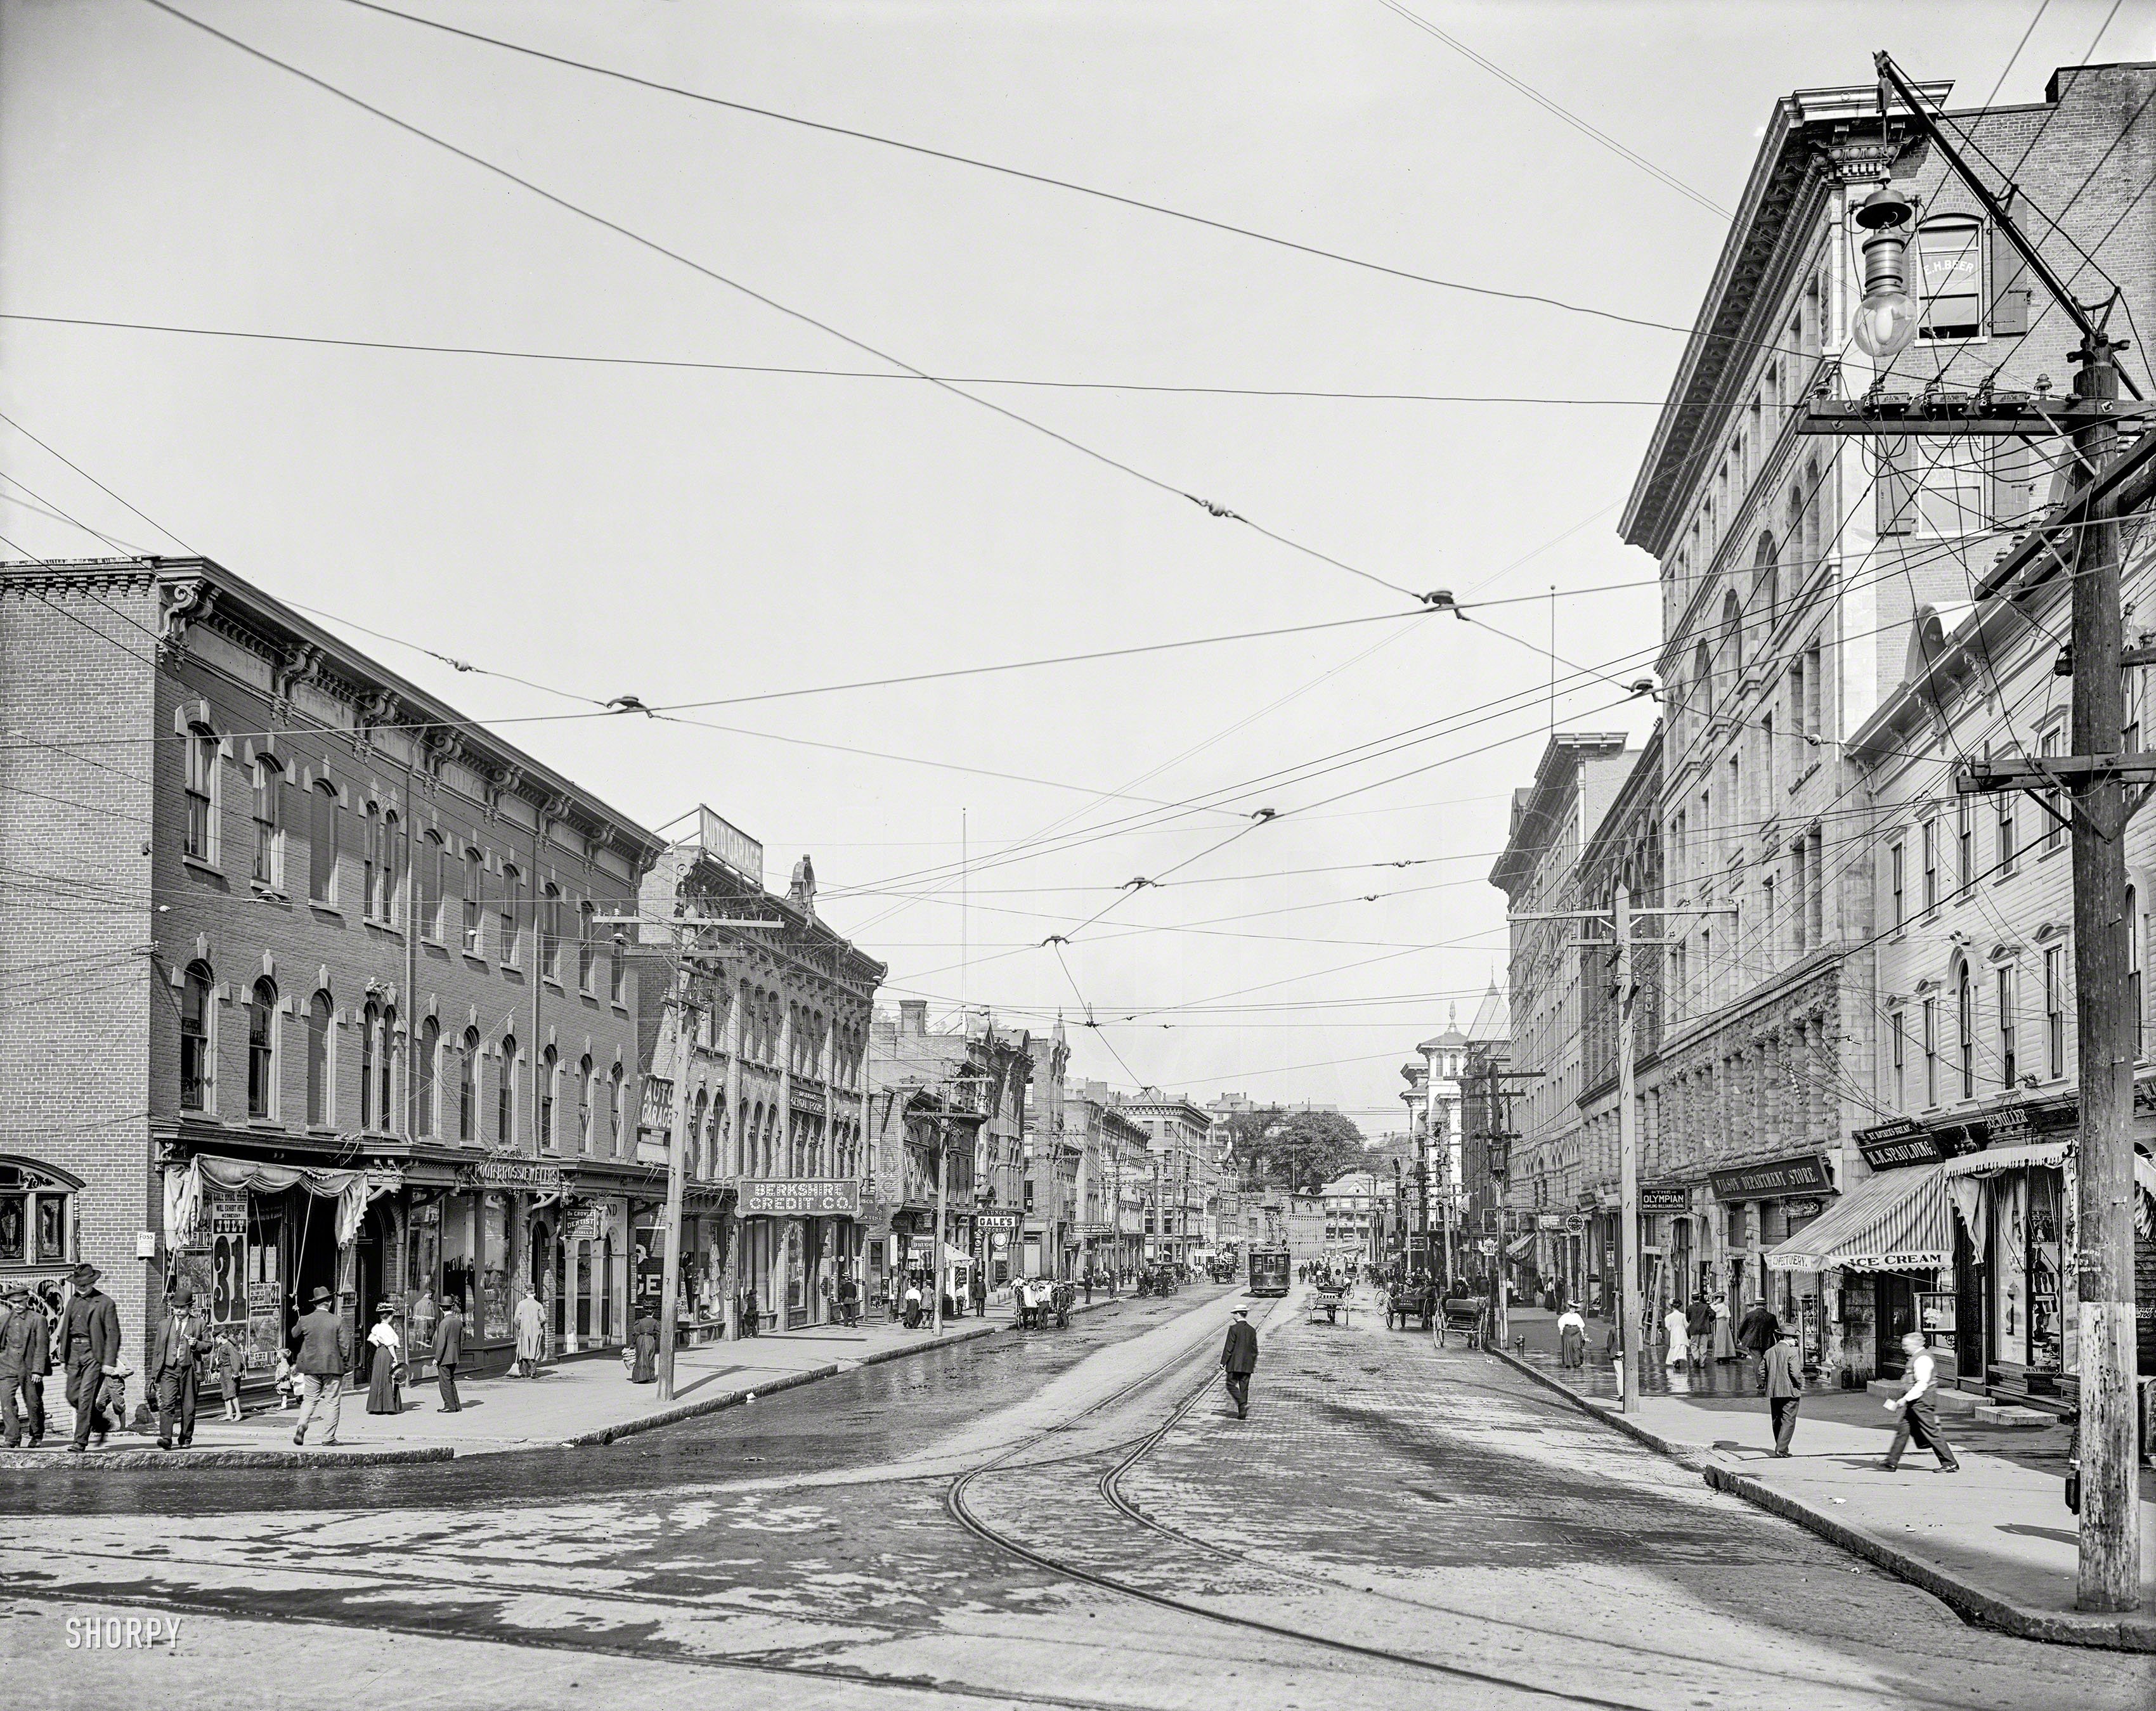 Circa 1907. North Adams, Massachusetts. "Main Street, looking west." Last seen here, looking the other way. 8x10 inch glass negative. View full size.